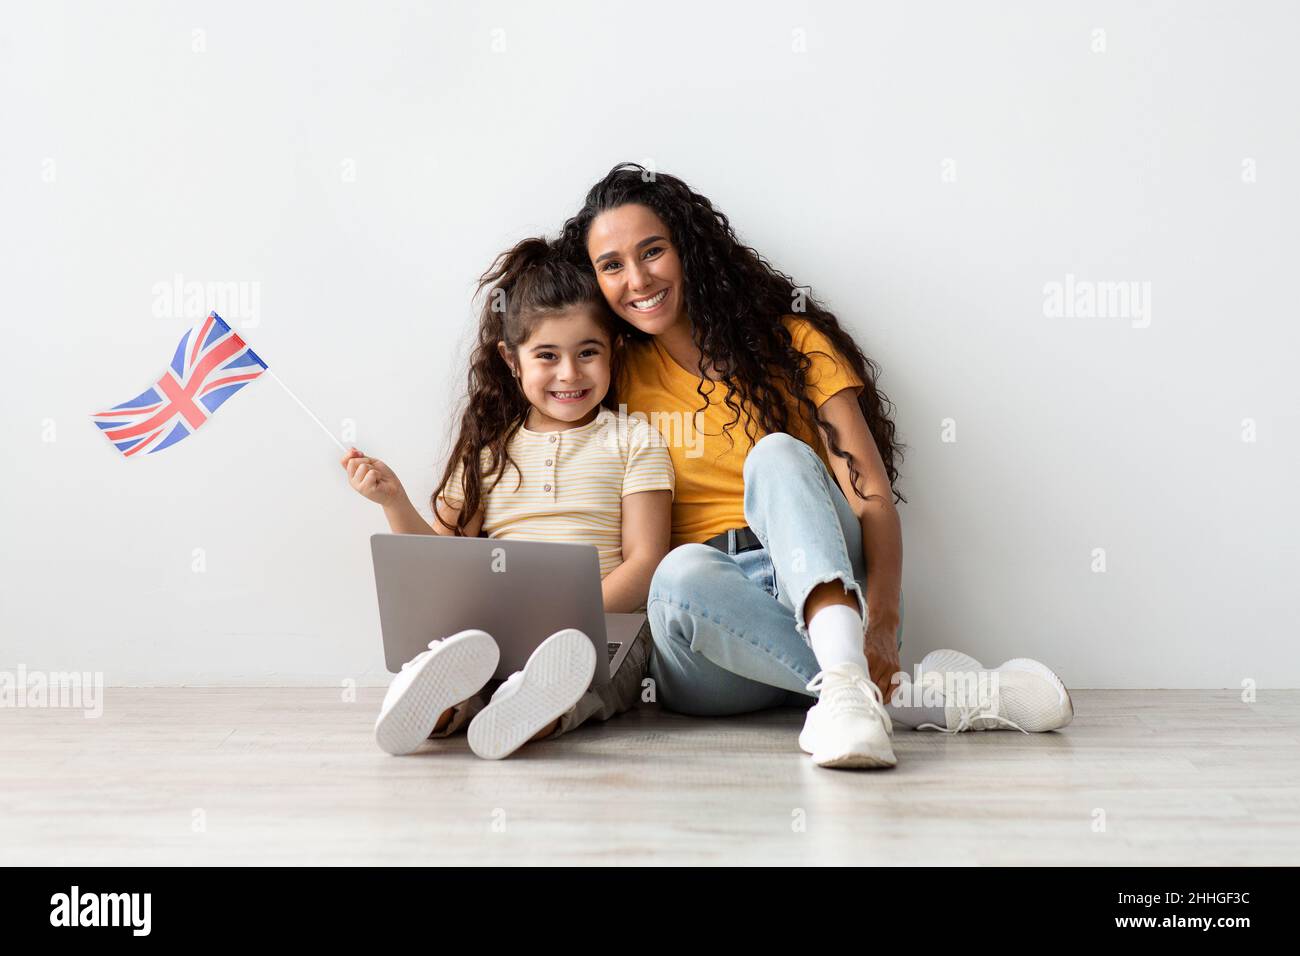 Online Visa Application. Mom And Little Daughter With British Flag And Laptop Stock Photo